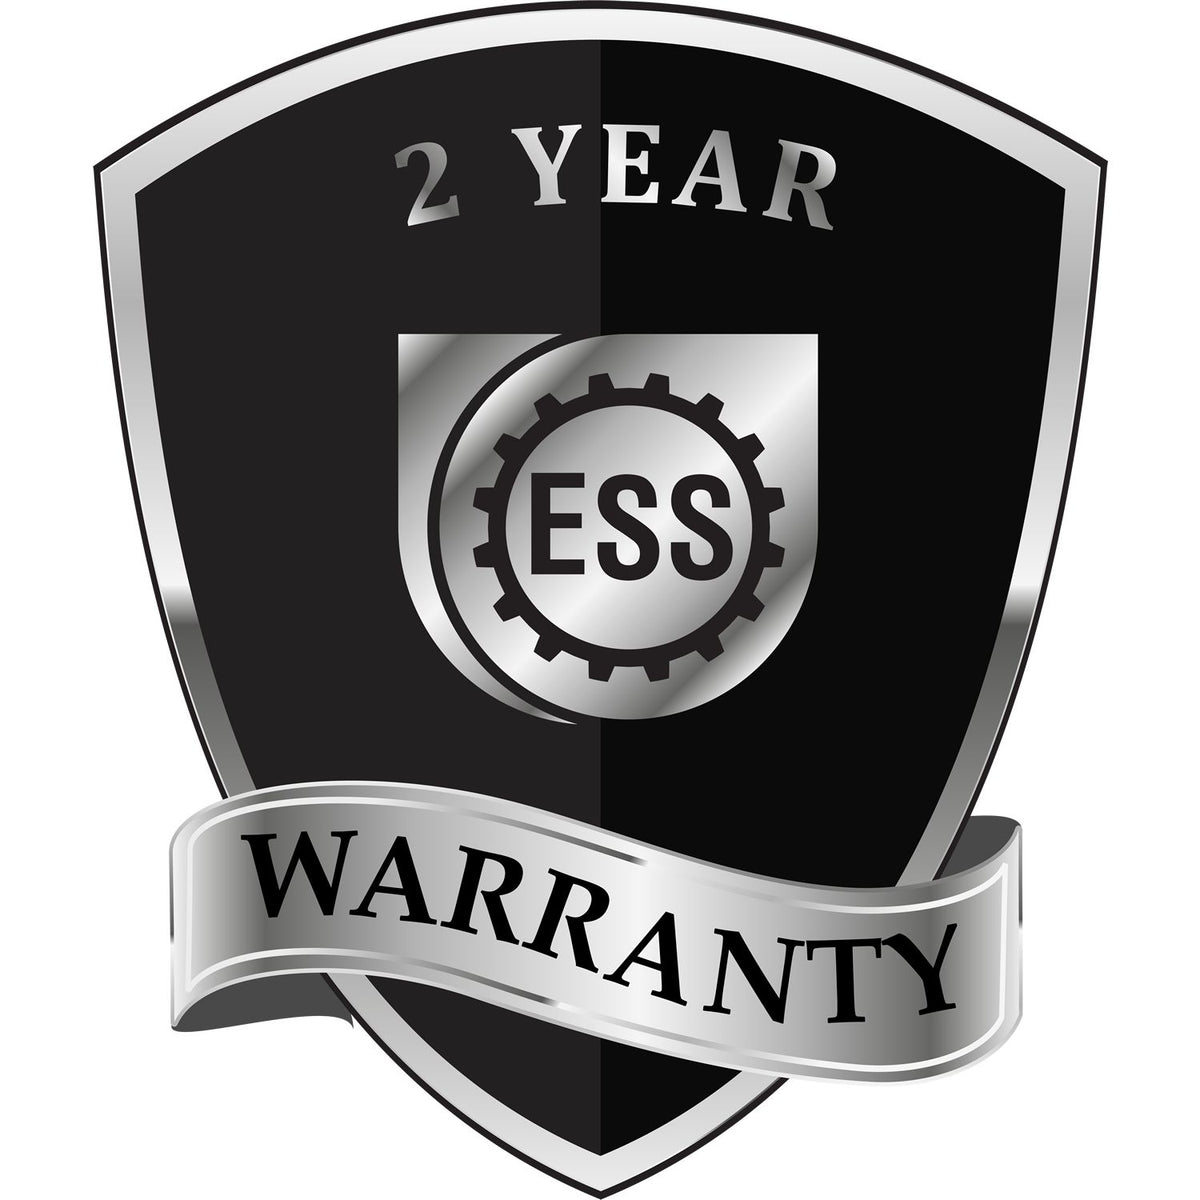 A black and silver badge or emblem showing warranty information for the Long Reach Louisiana Geology Seal